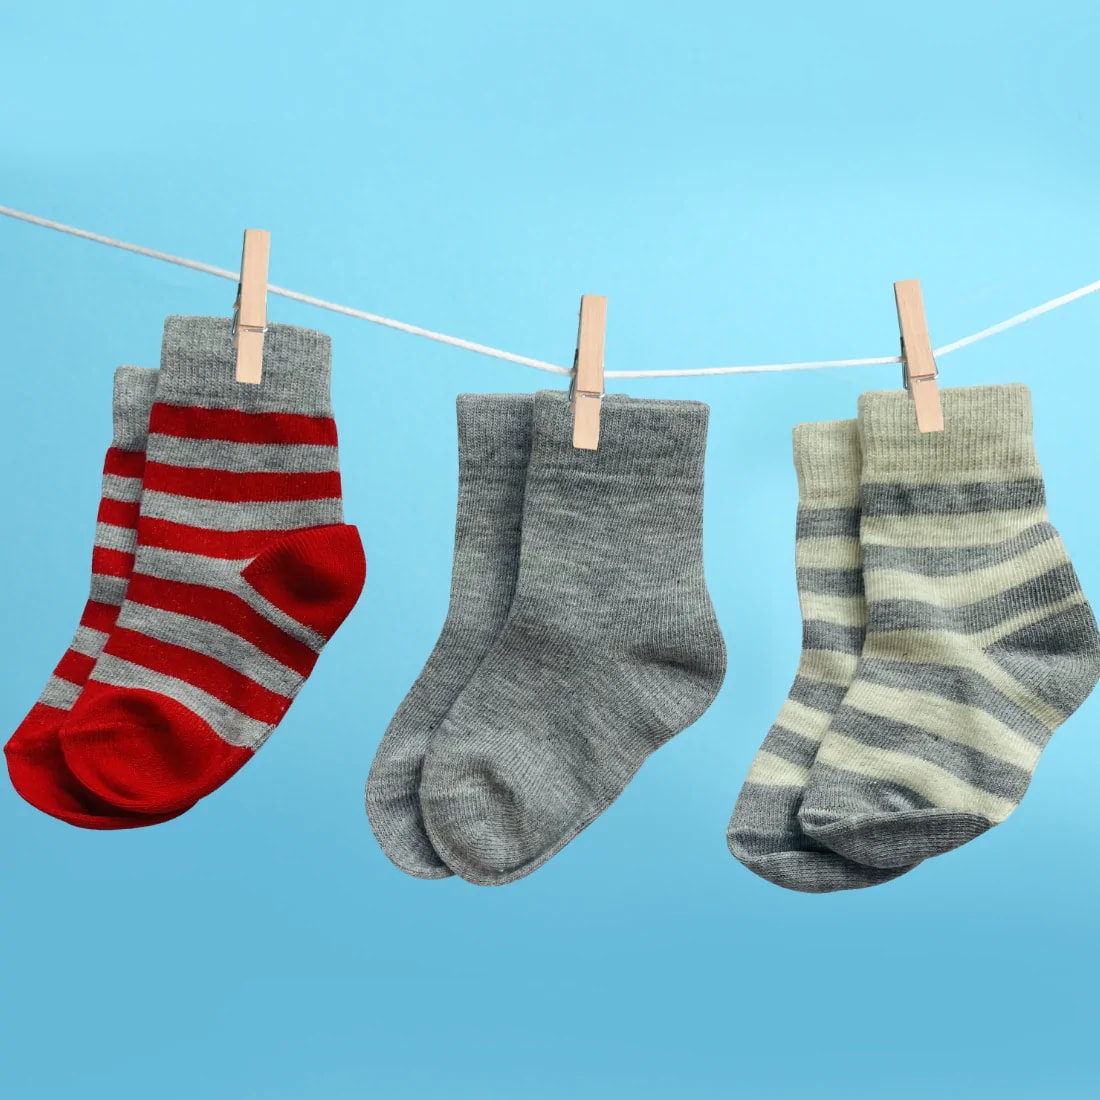 Baby Socks 0-6 Months - Unisex Grey Striped & Solid (Pack of 3)